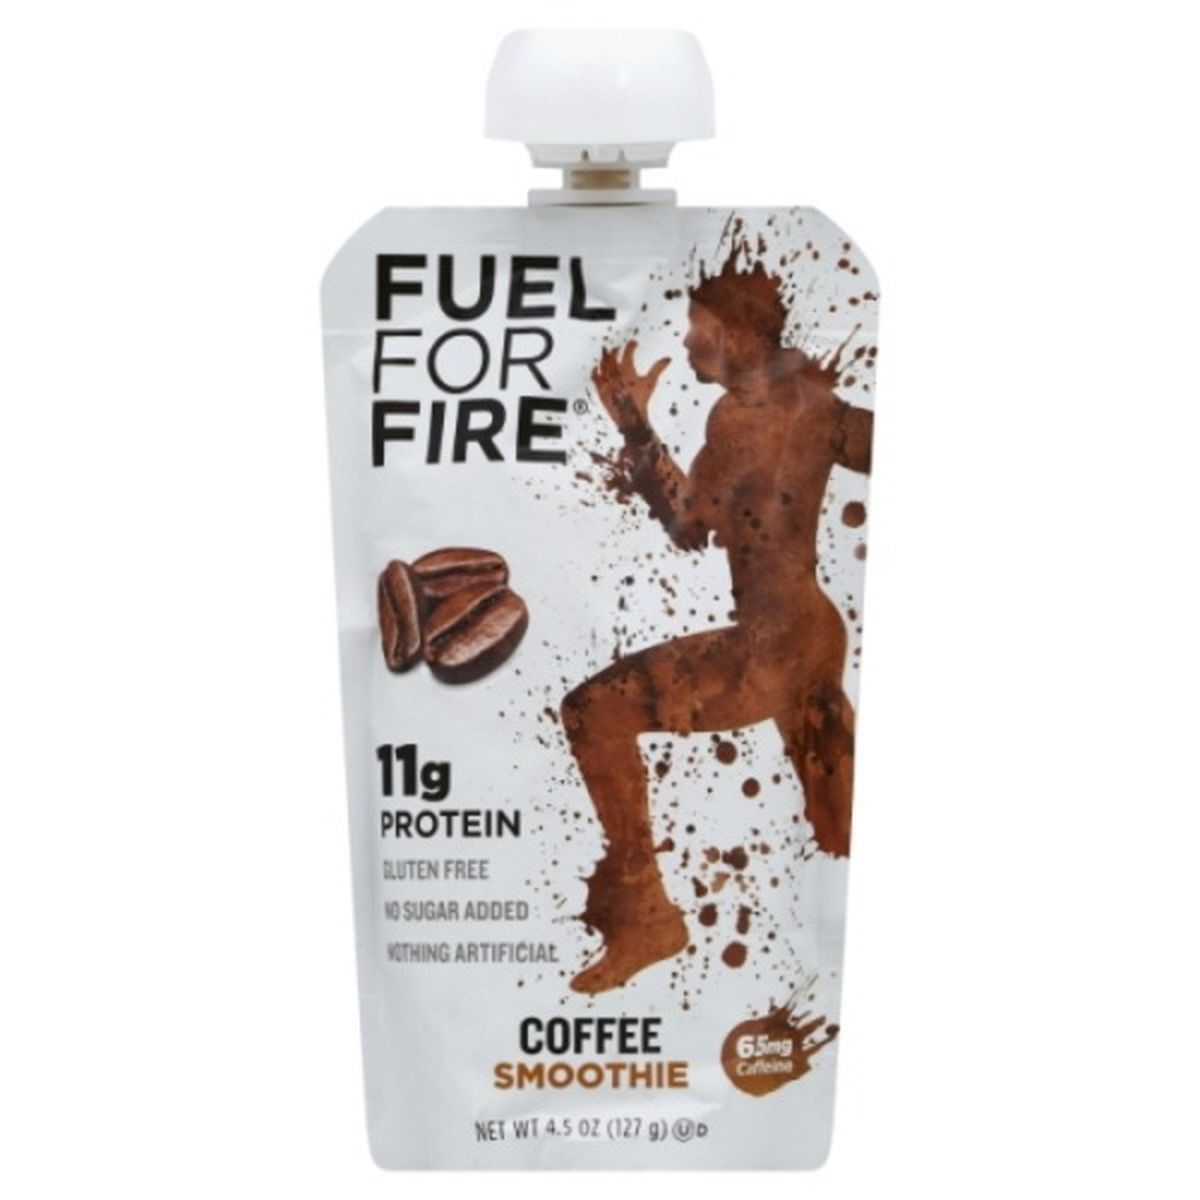 Calories in Fuel for Fire Smoothie, Coffee